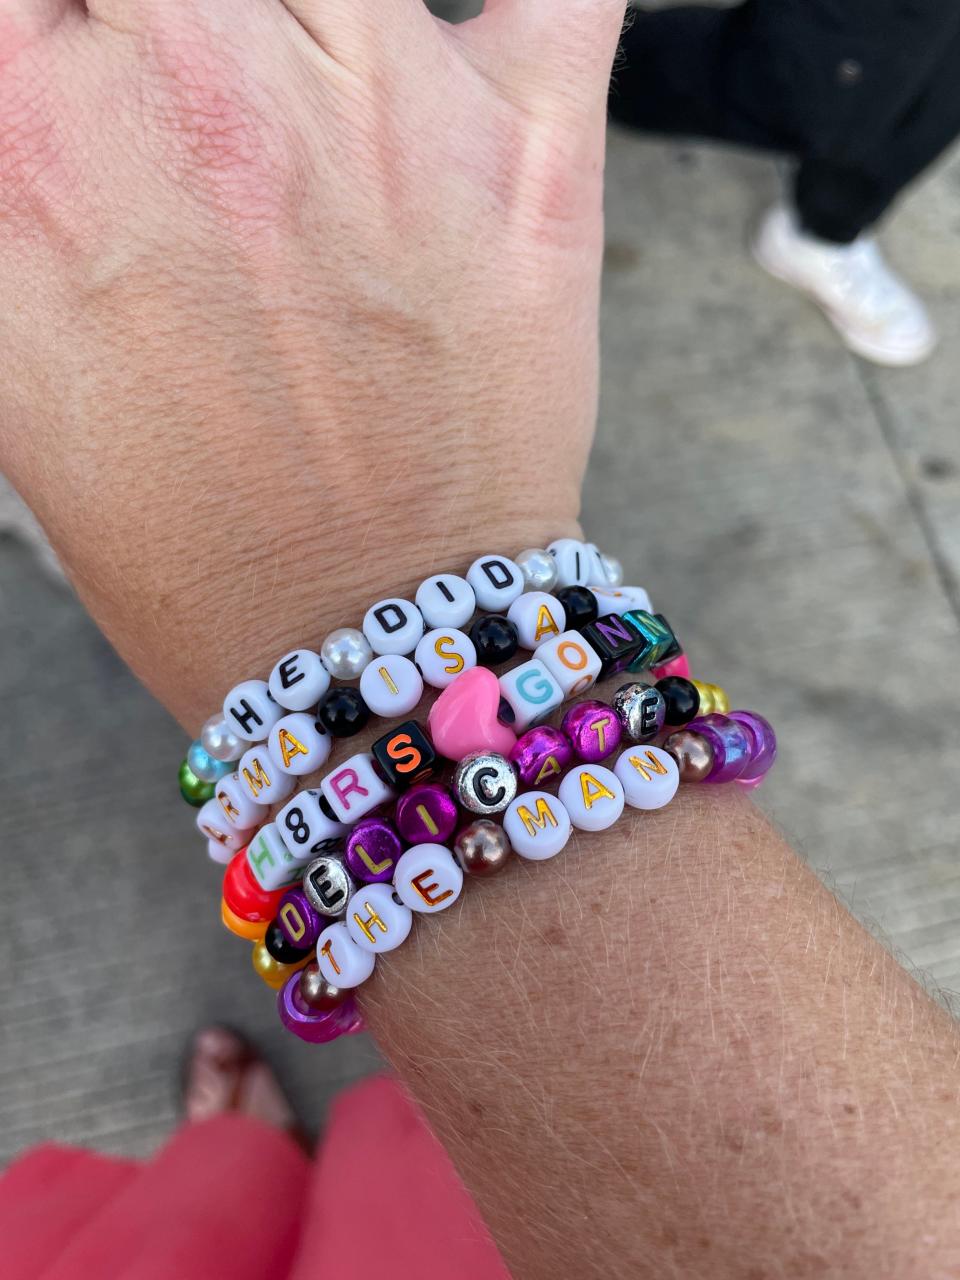 Concertgoers made Taylor Swift themed friendship bracelets to give away and trade at her concerts.